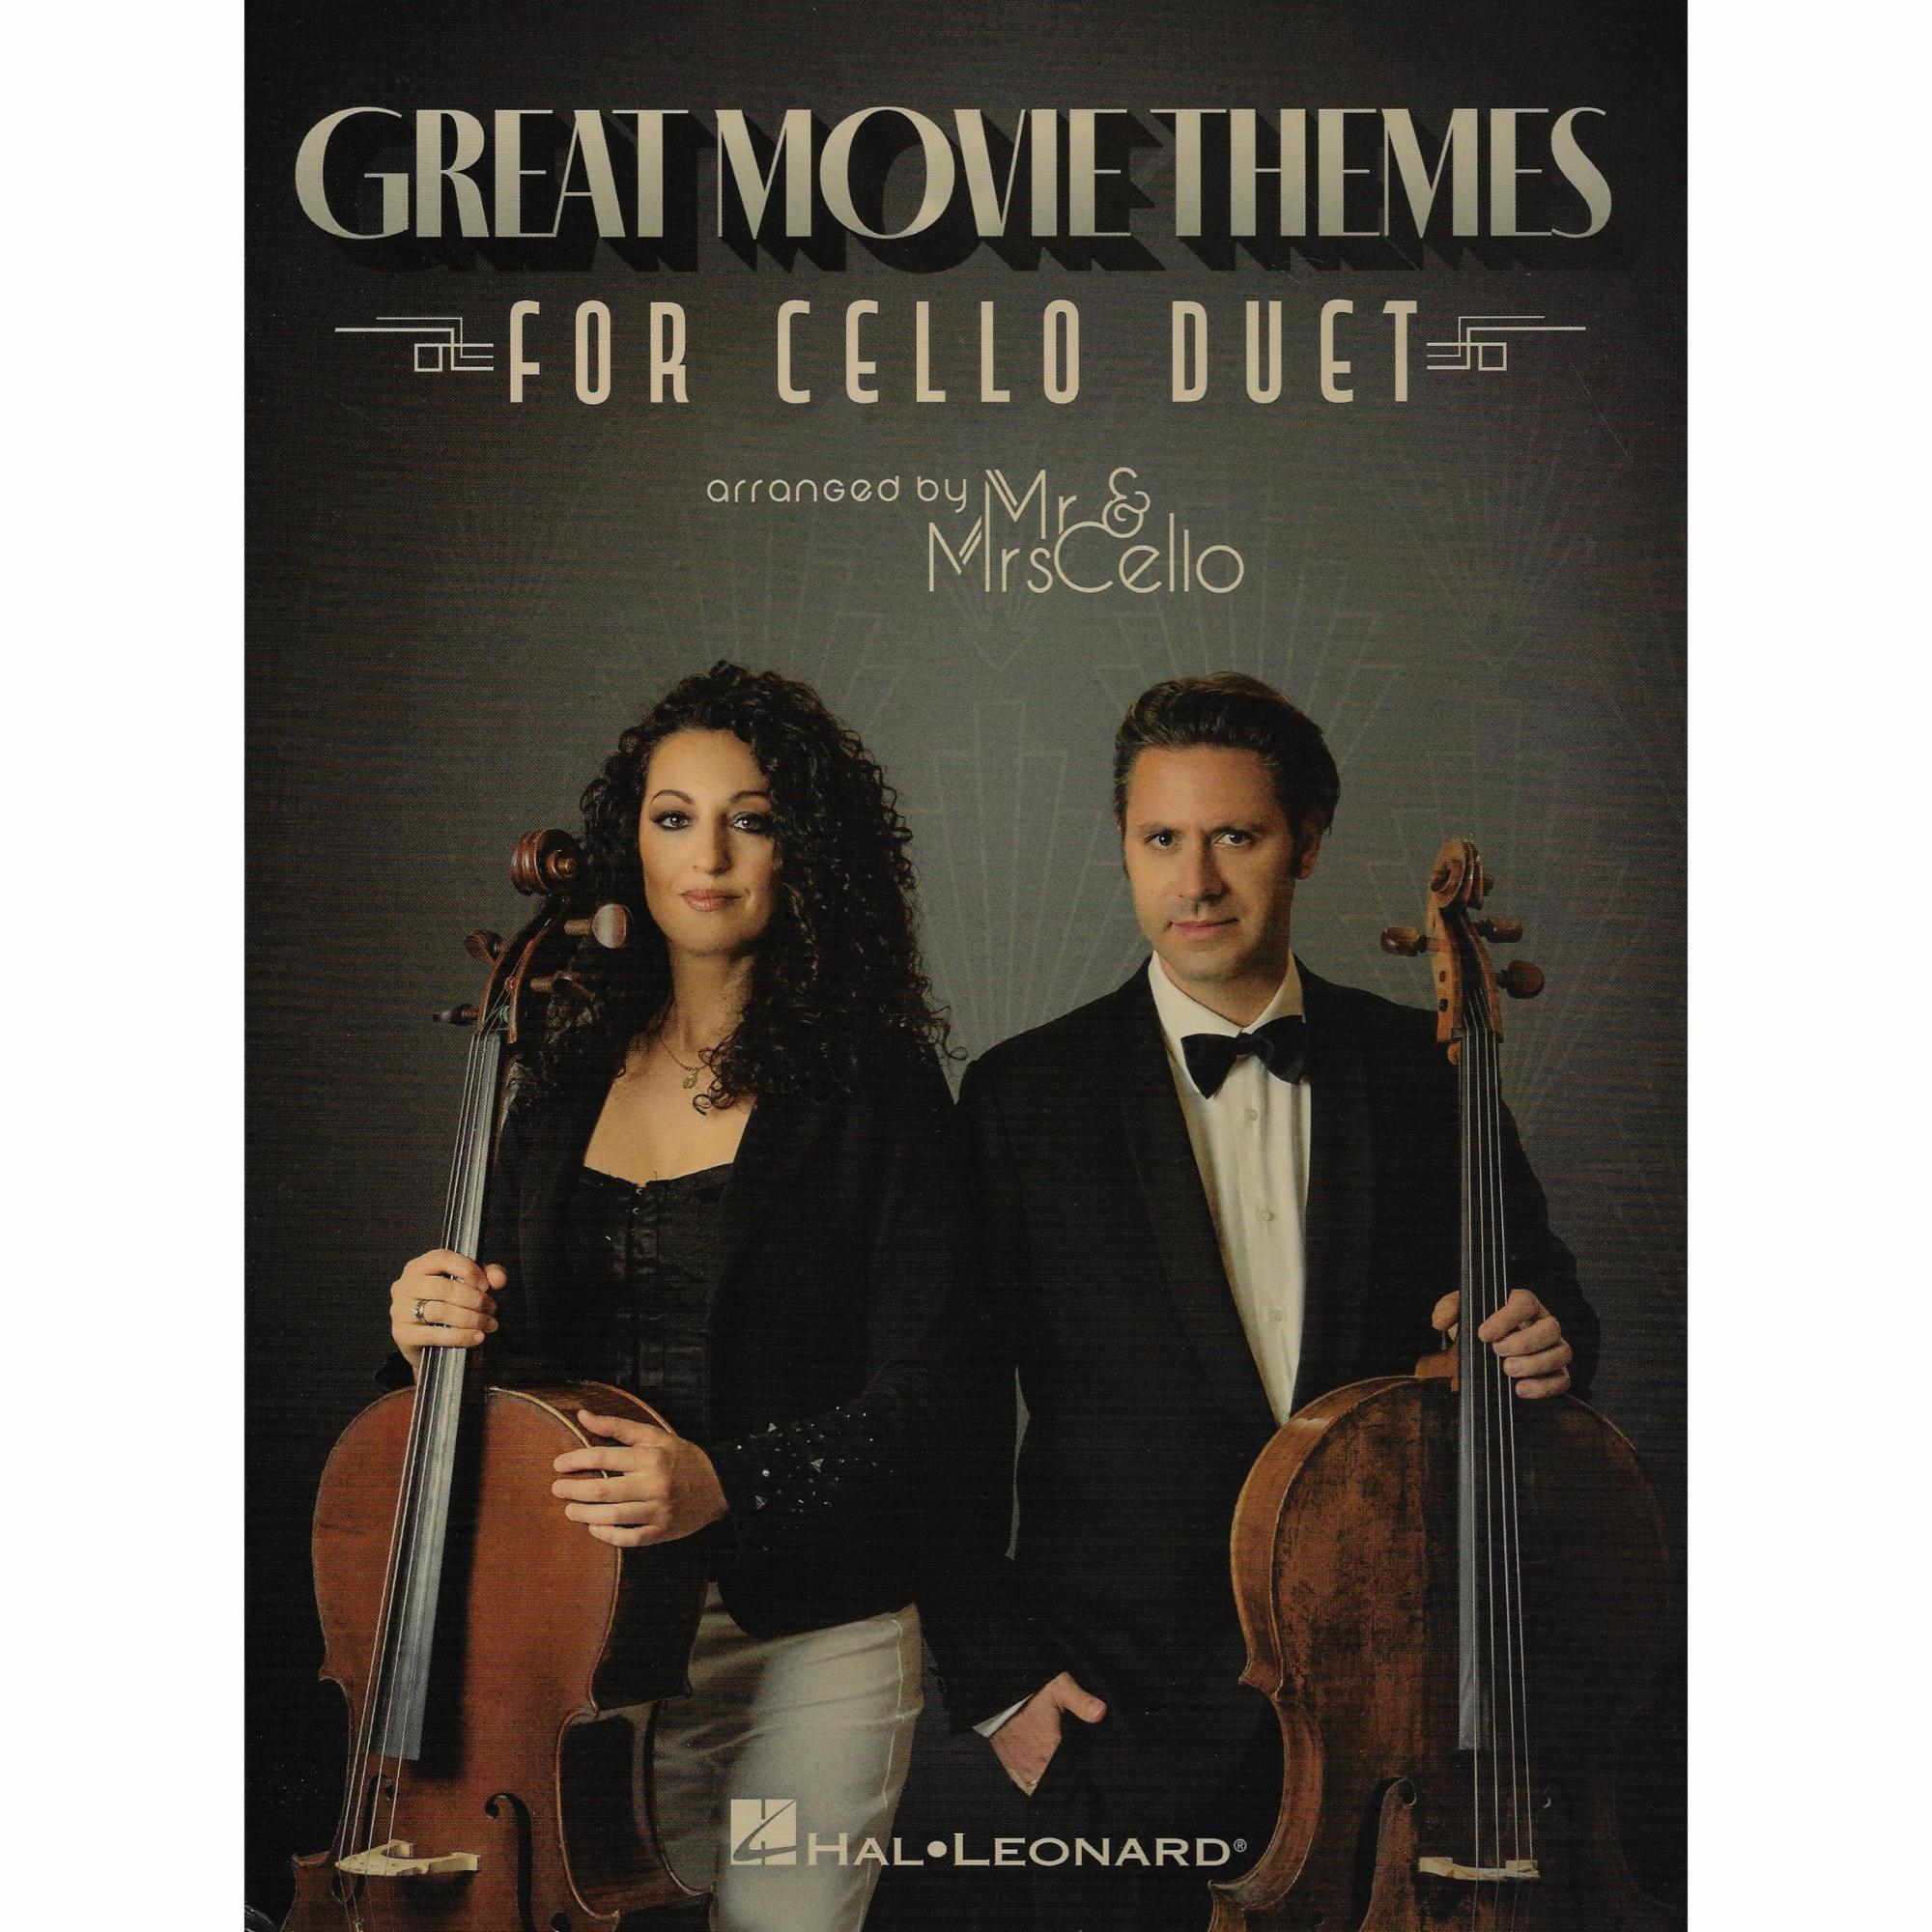 Great Movie Themes for Cello Duet